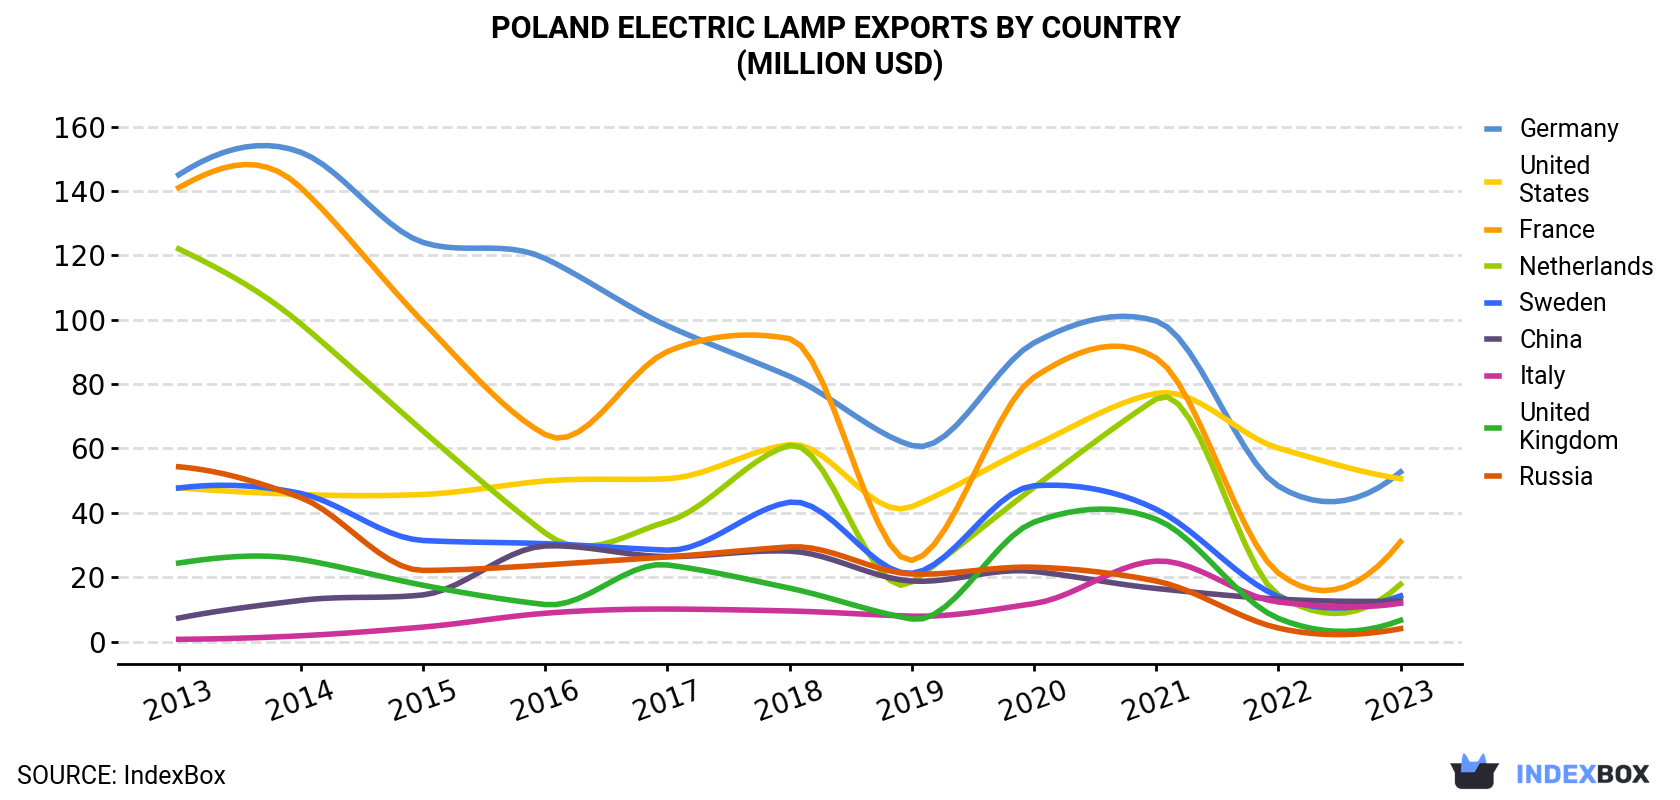 Poland Electric Lamp Exports By Country (Million USD)